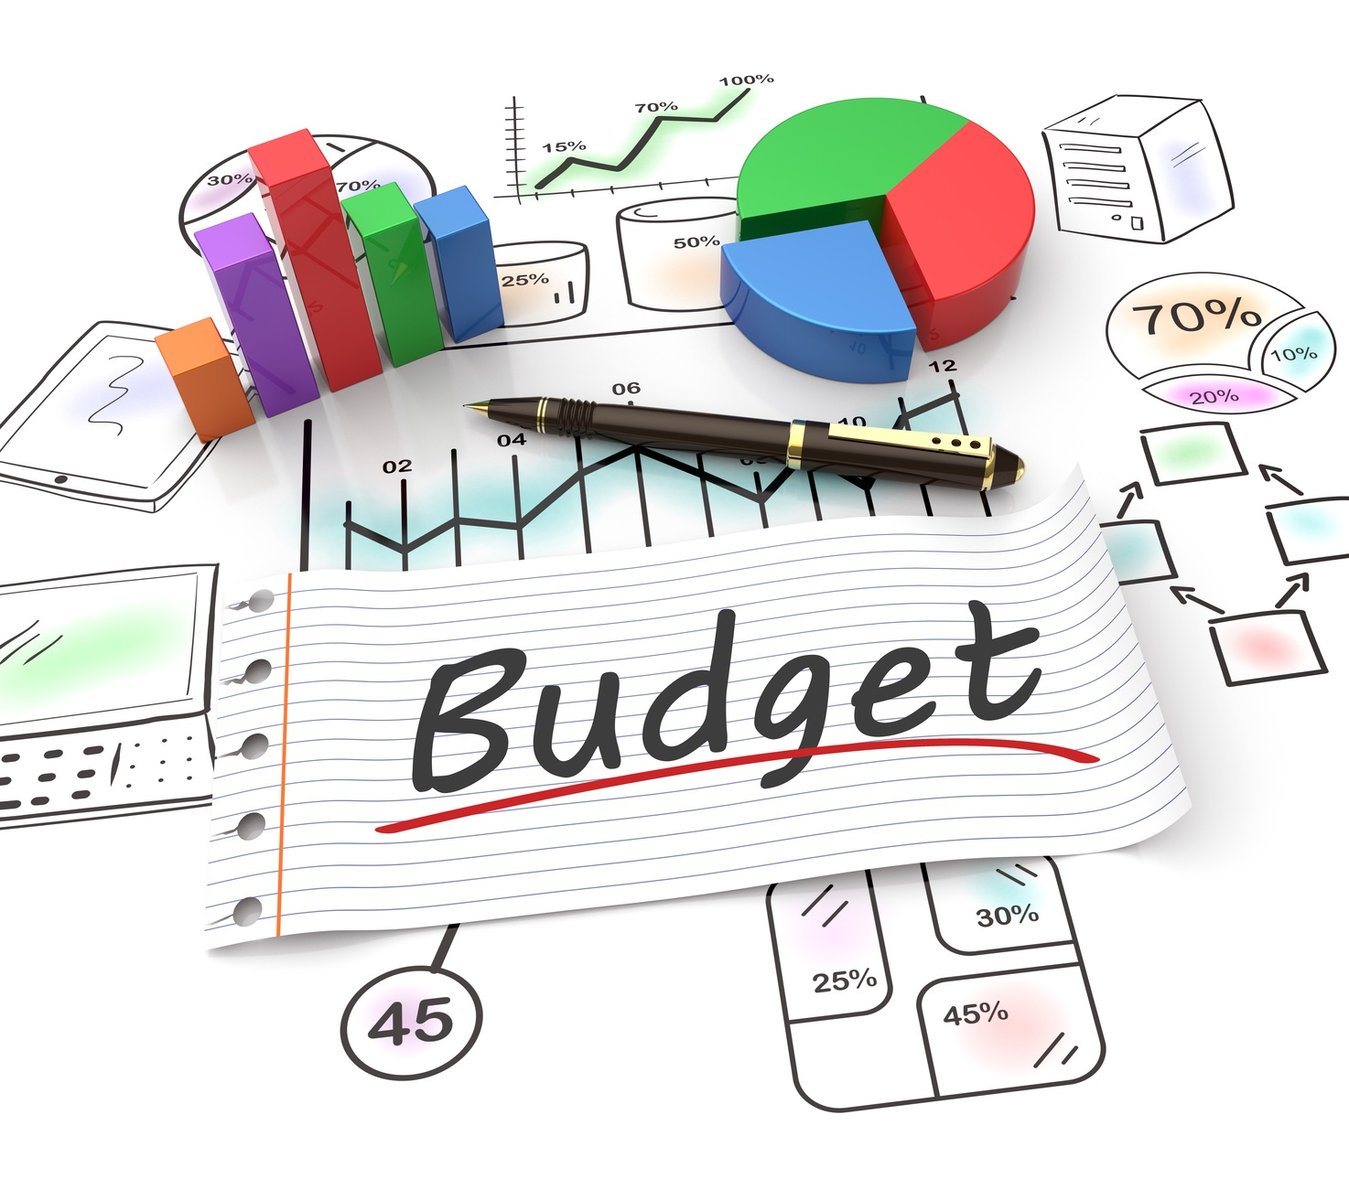 Content Marketing Budgets on the Rise (Infographic)